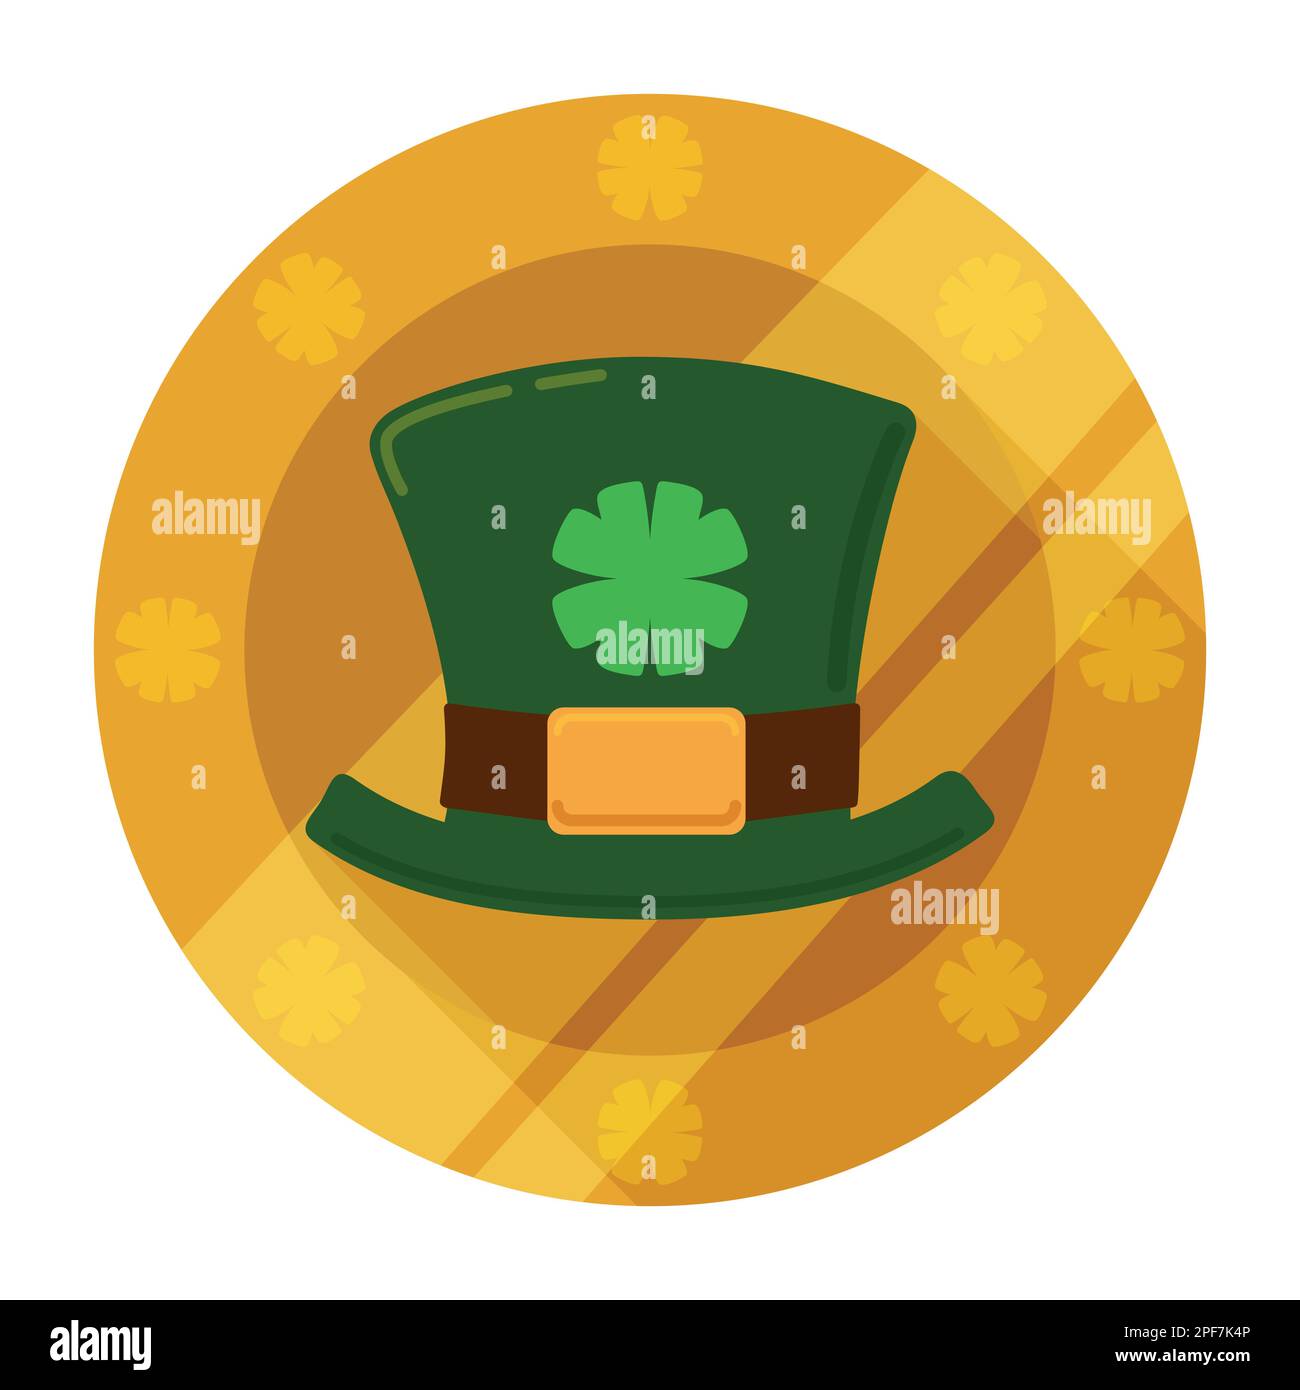 St. Patrick's Day commemorative golden coin decorated with green top hat and shamrocks. Isolated object in flat style. Stock Vector